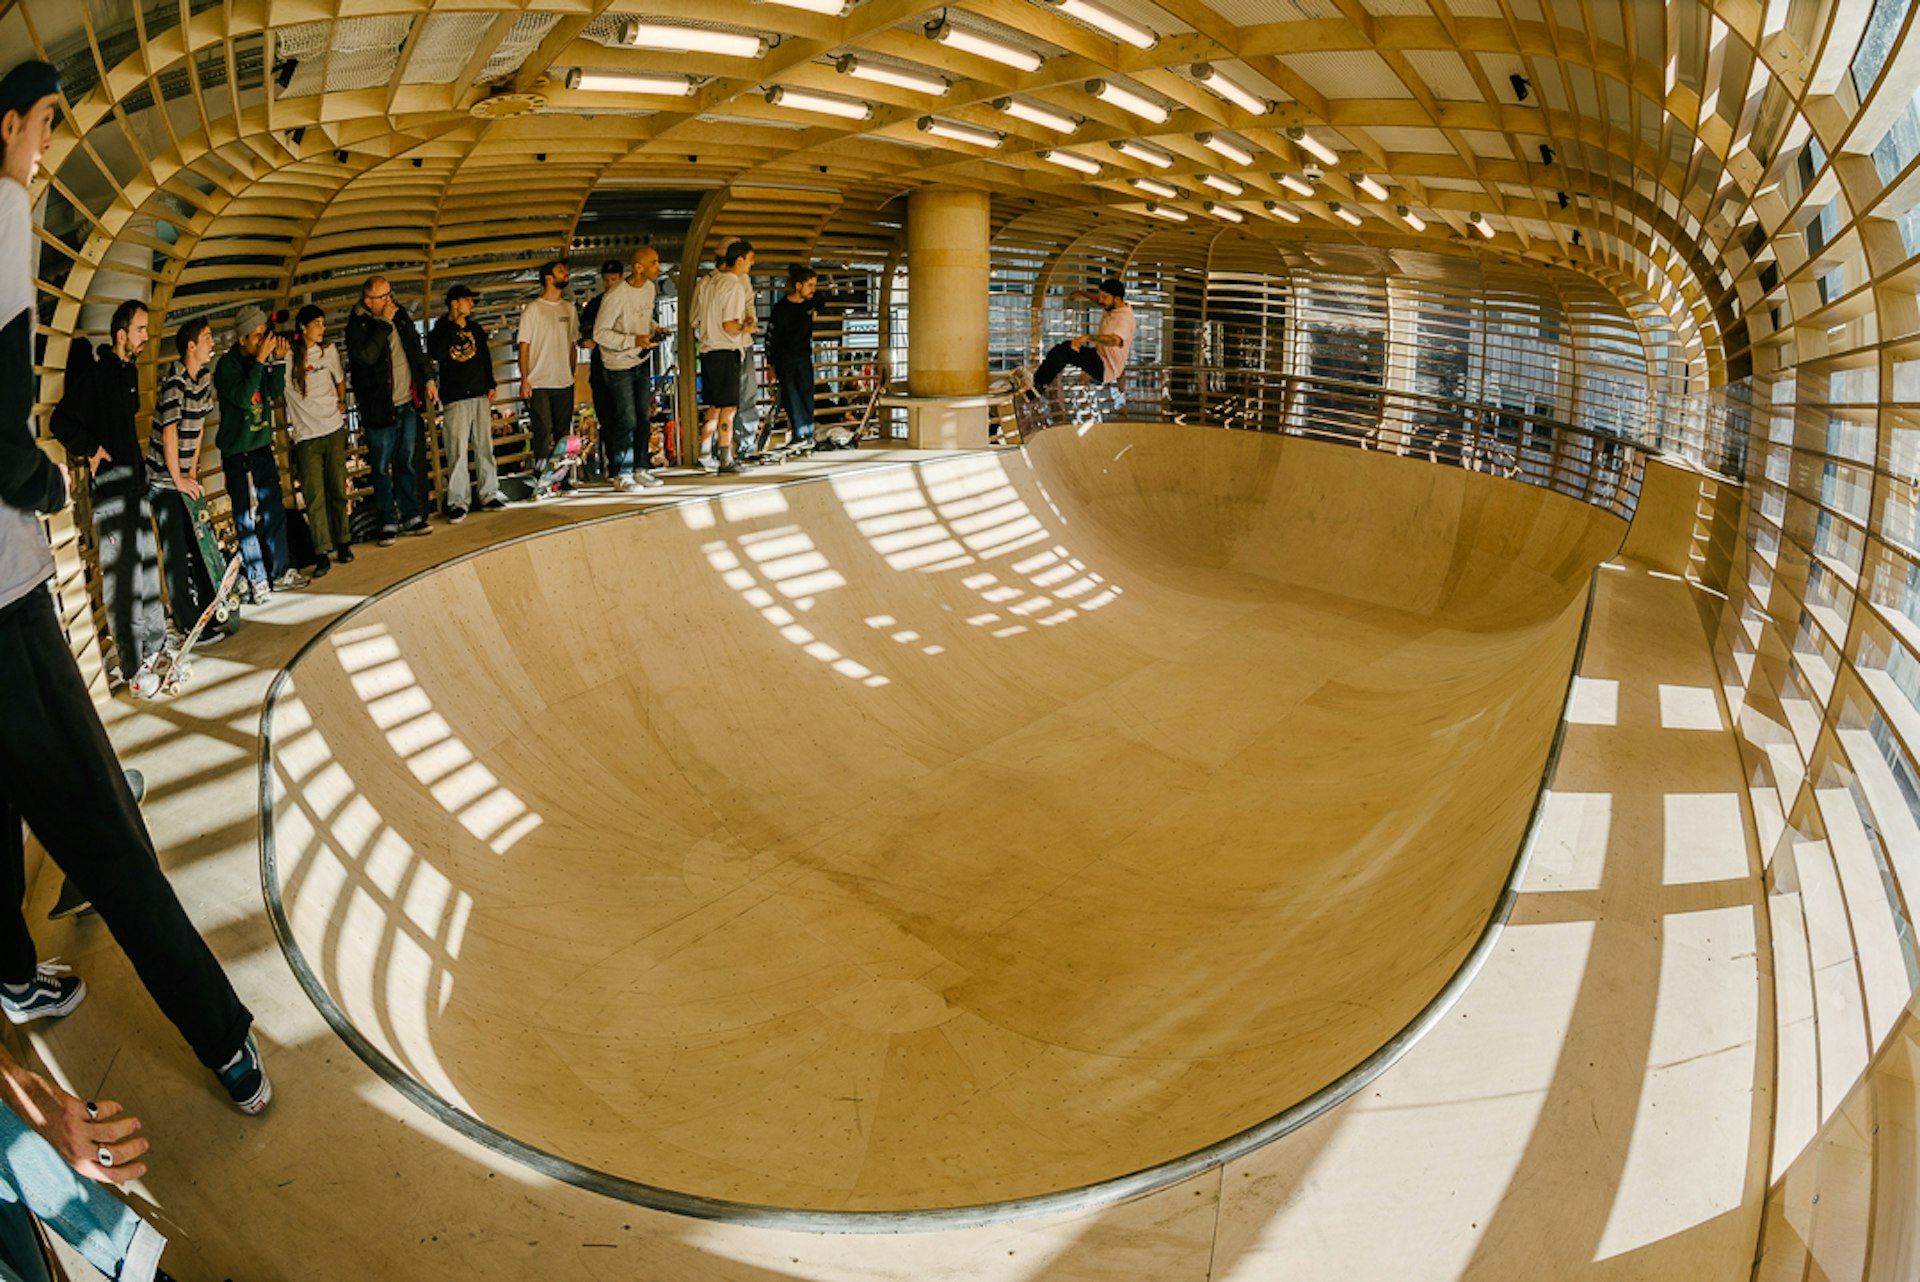 Good news! There’s a new skate bowl in central London